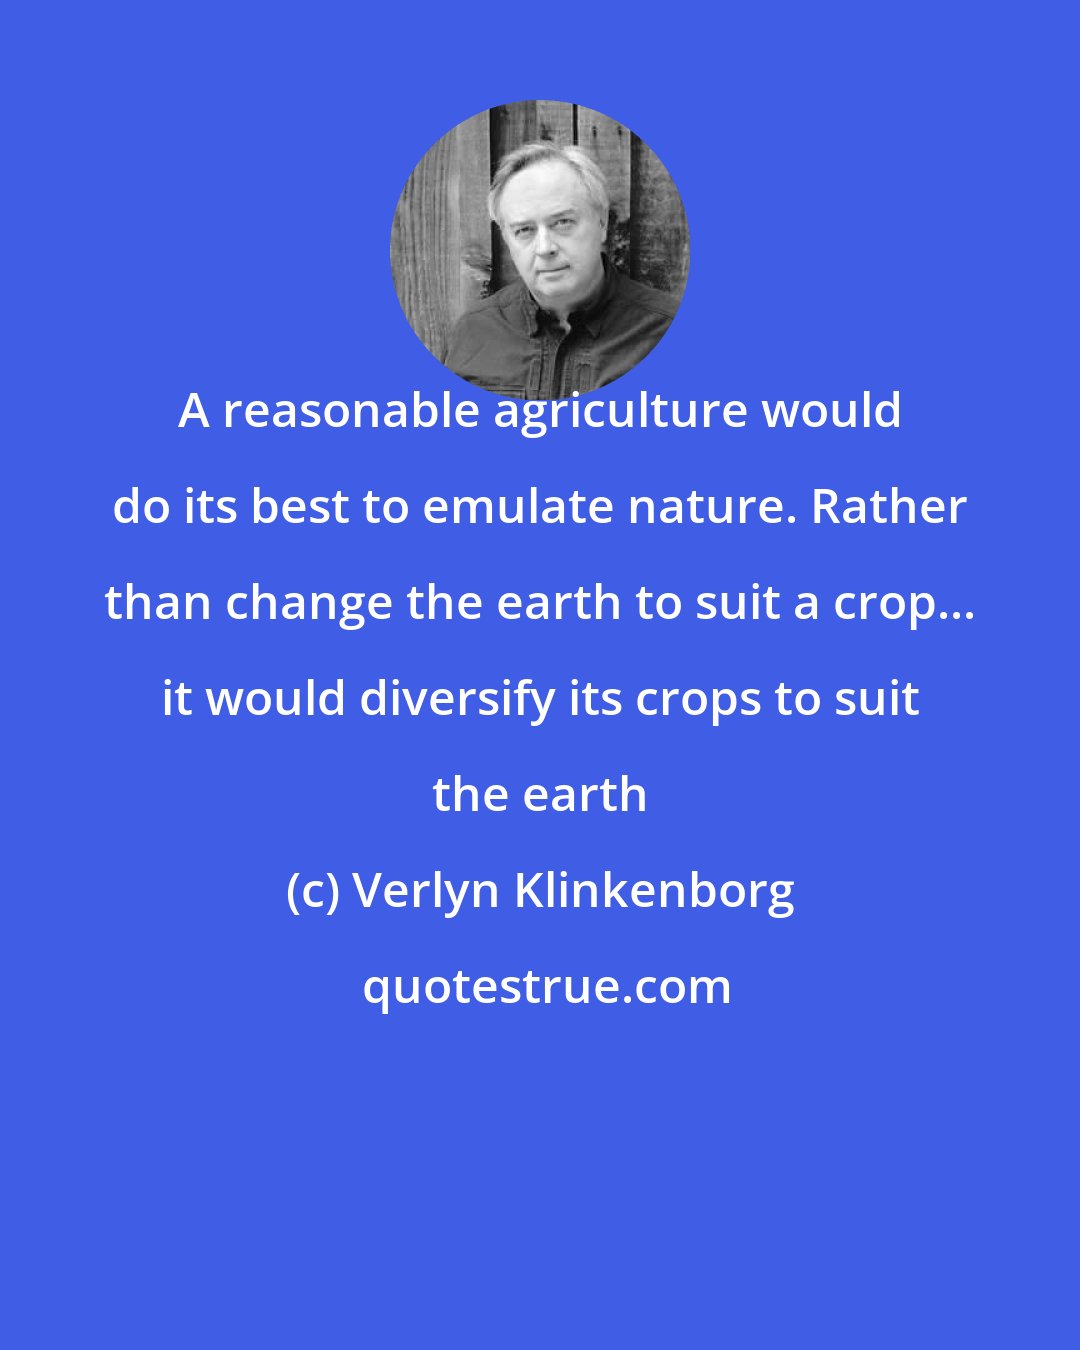 Verlyn Klinkenborg: A reasonable agriculture would do its best to emulate nature. Rather than change the earth to suit a crop... it would diversify its crops to suit the earth